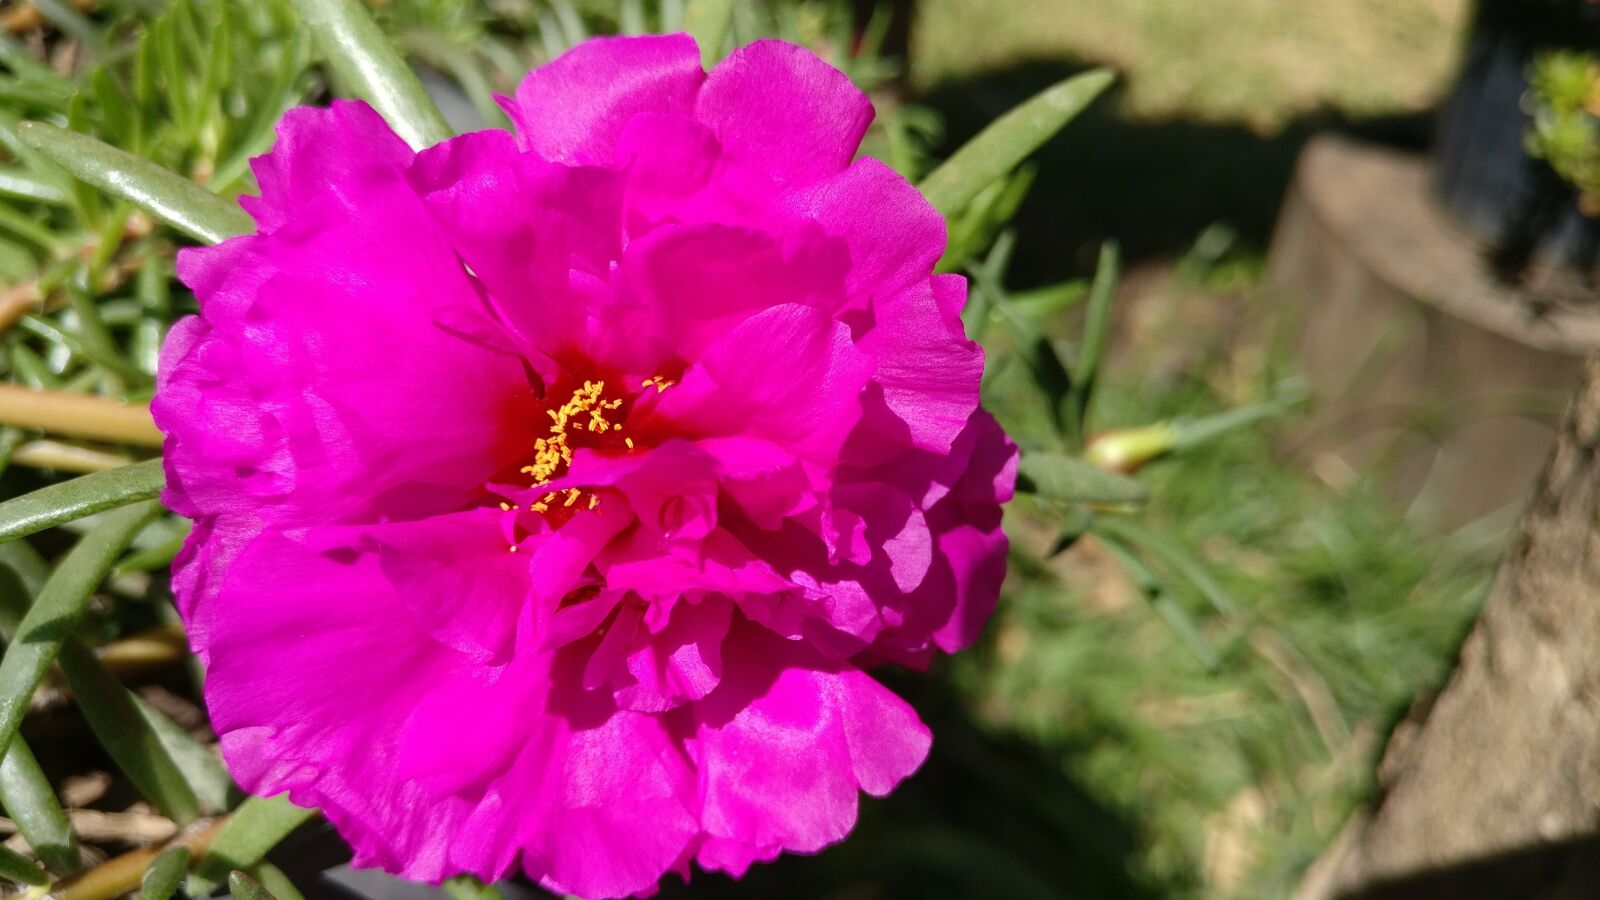 OnePlus A3010 sample photo. Flower, beauty, nature photography